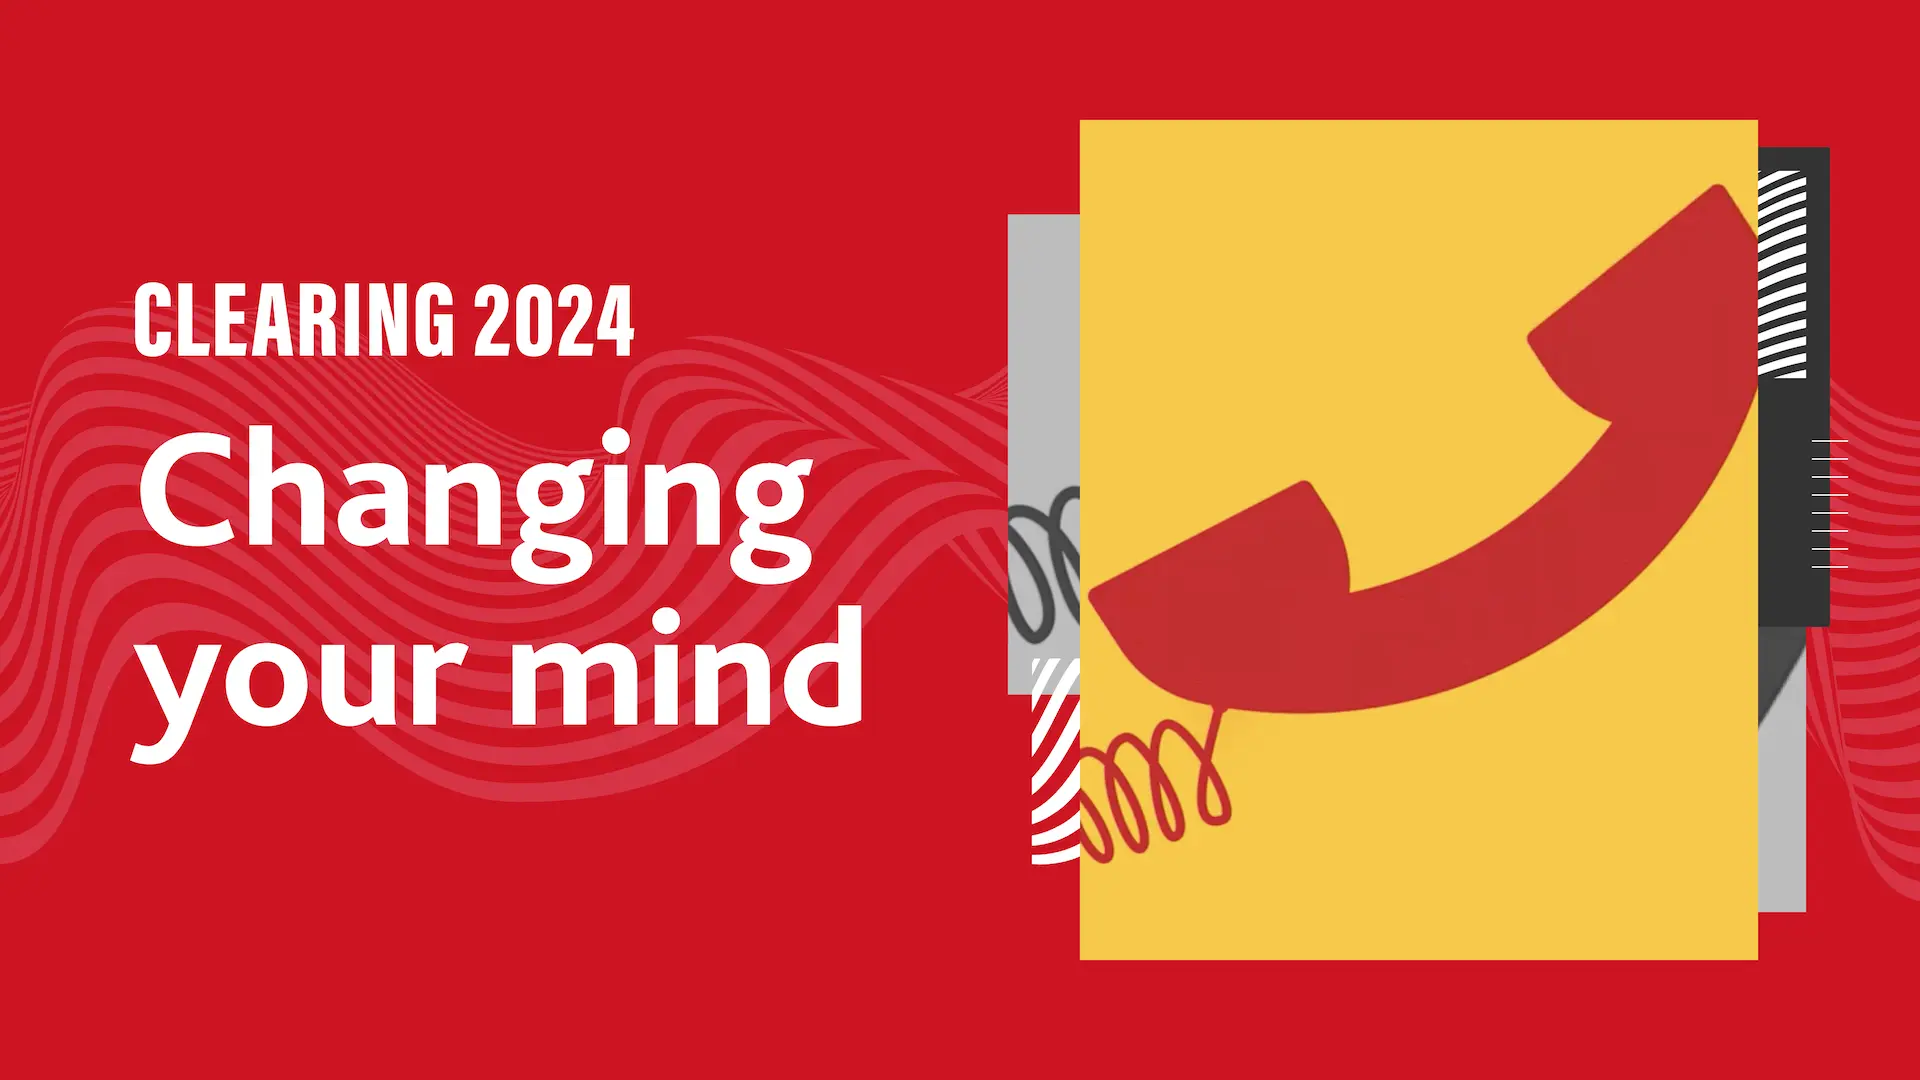 Image saying - Clearing 2024, Changing your mind